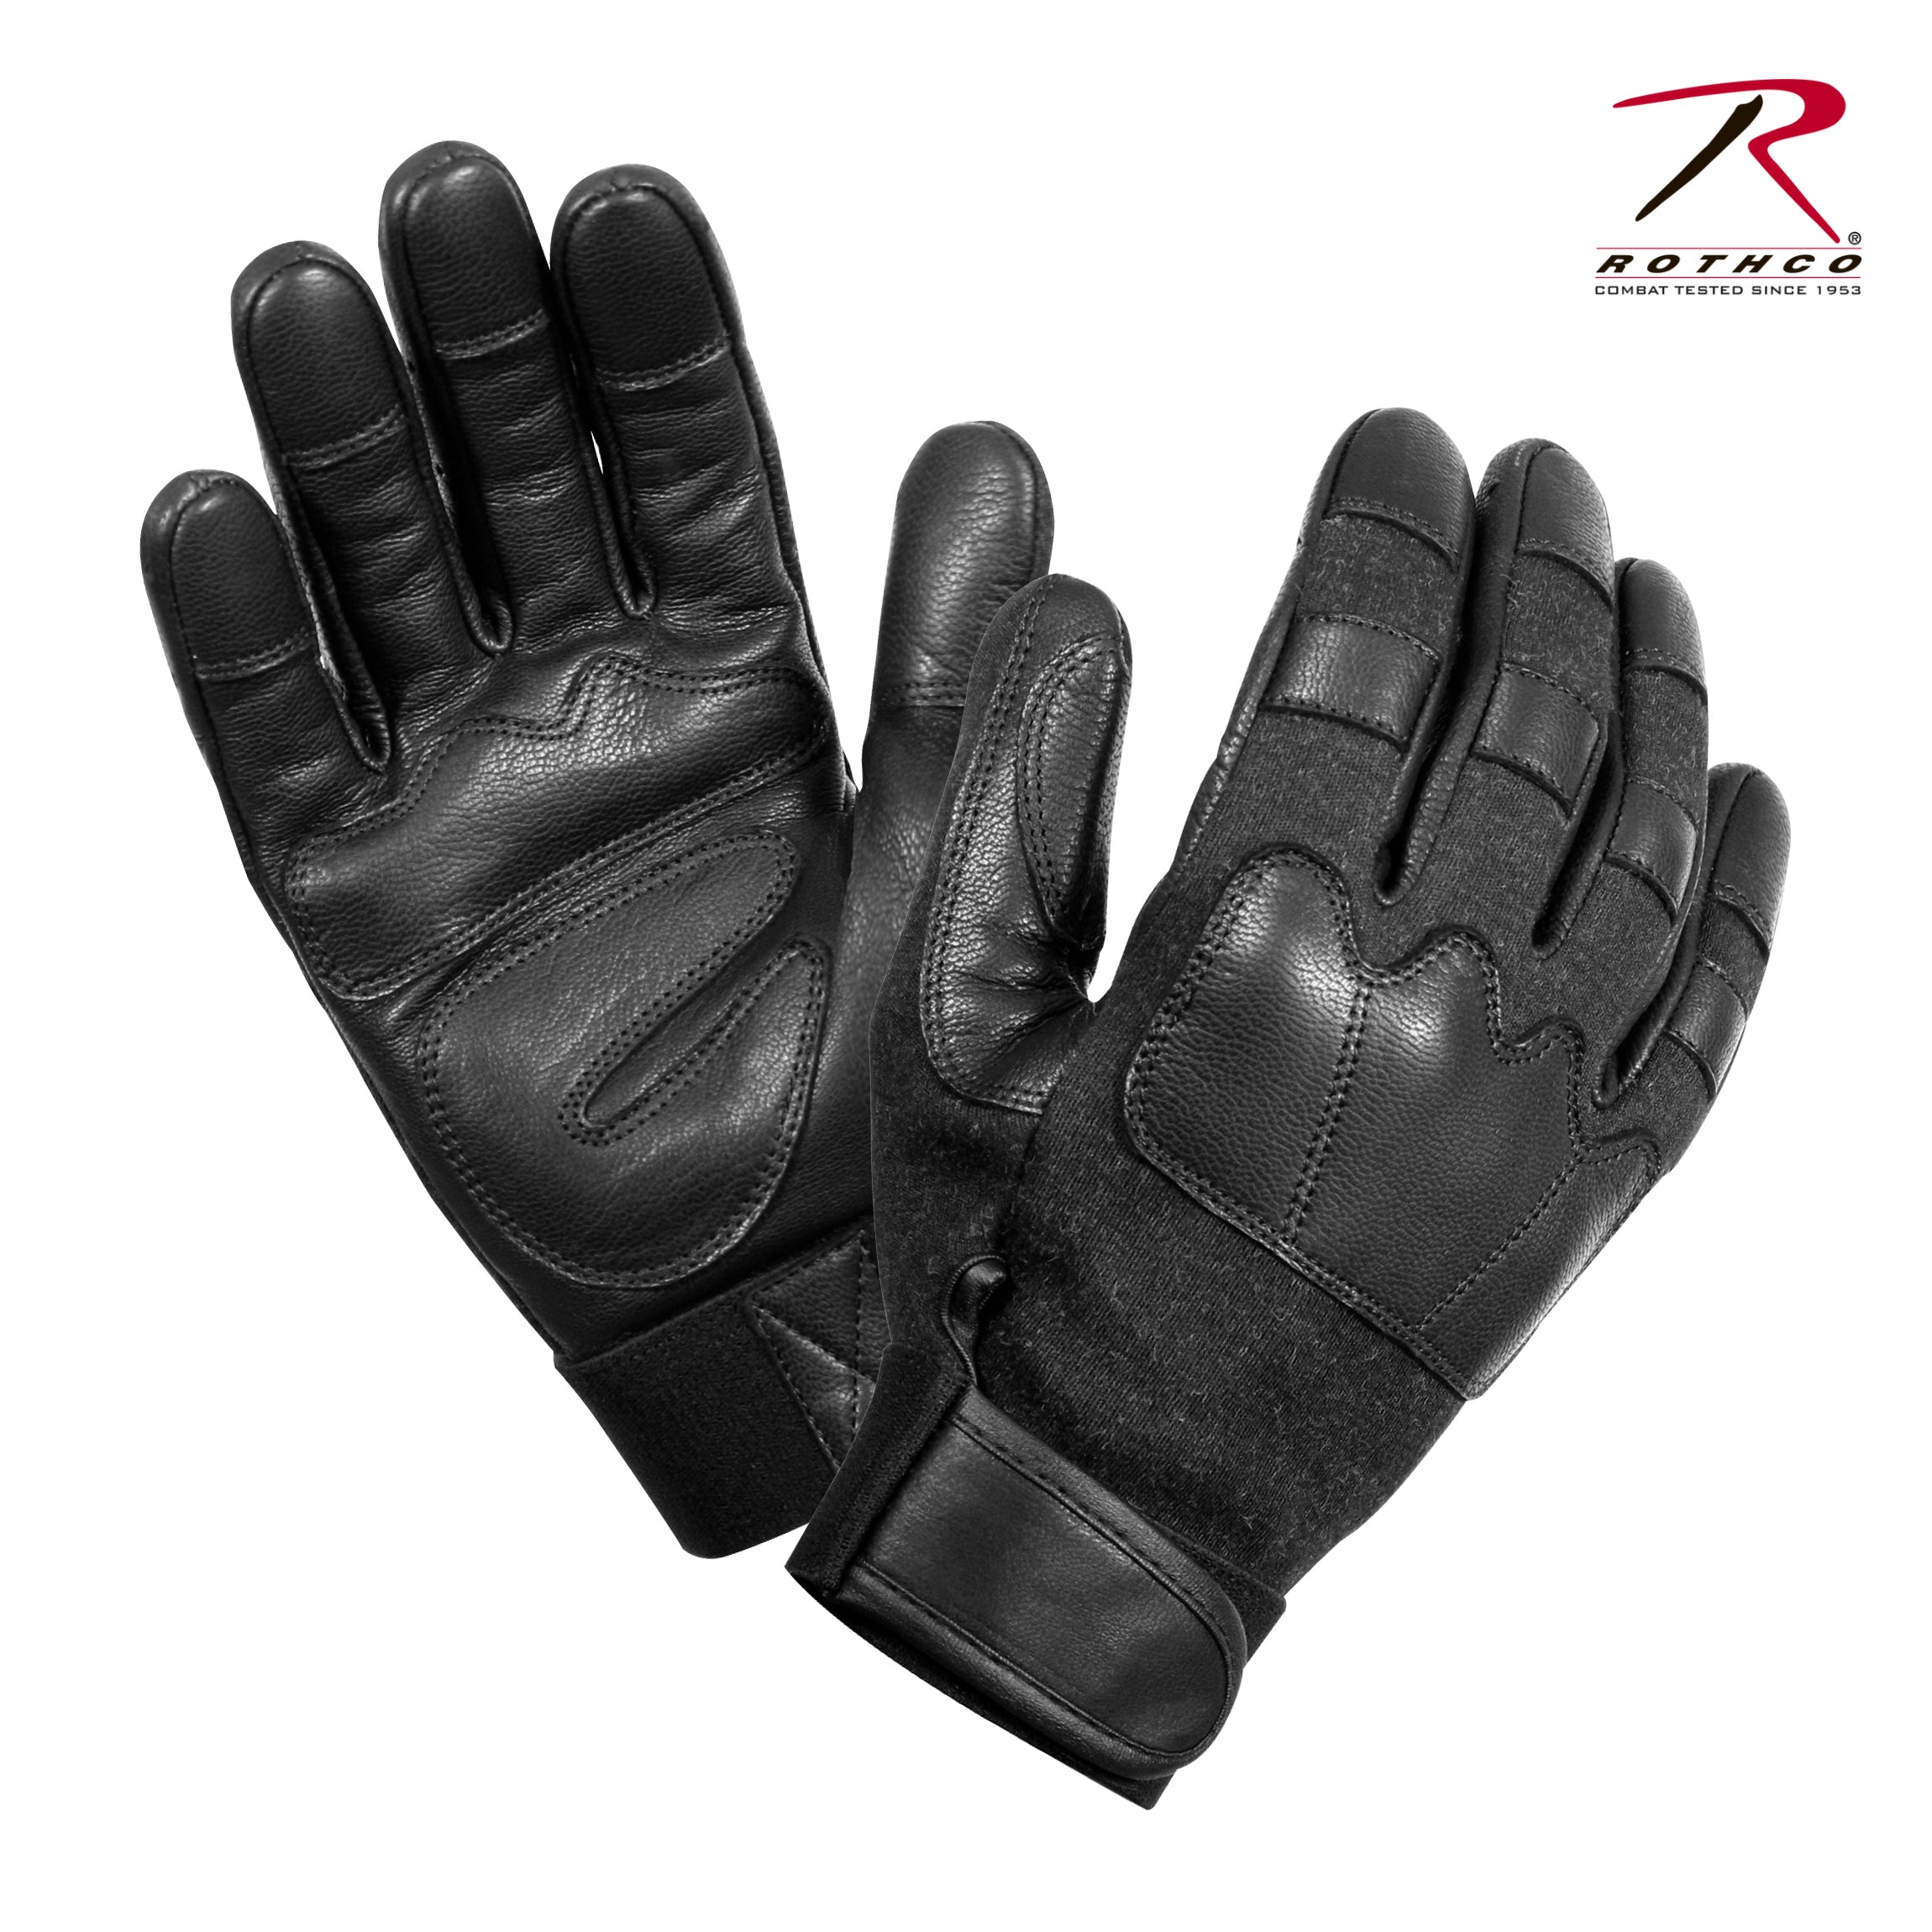 Rothco - Fire & Cut Resistant Tactical Gloves (3483)